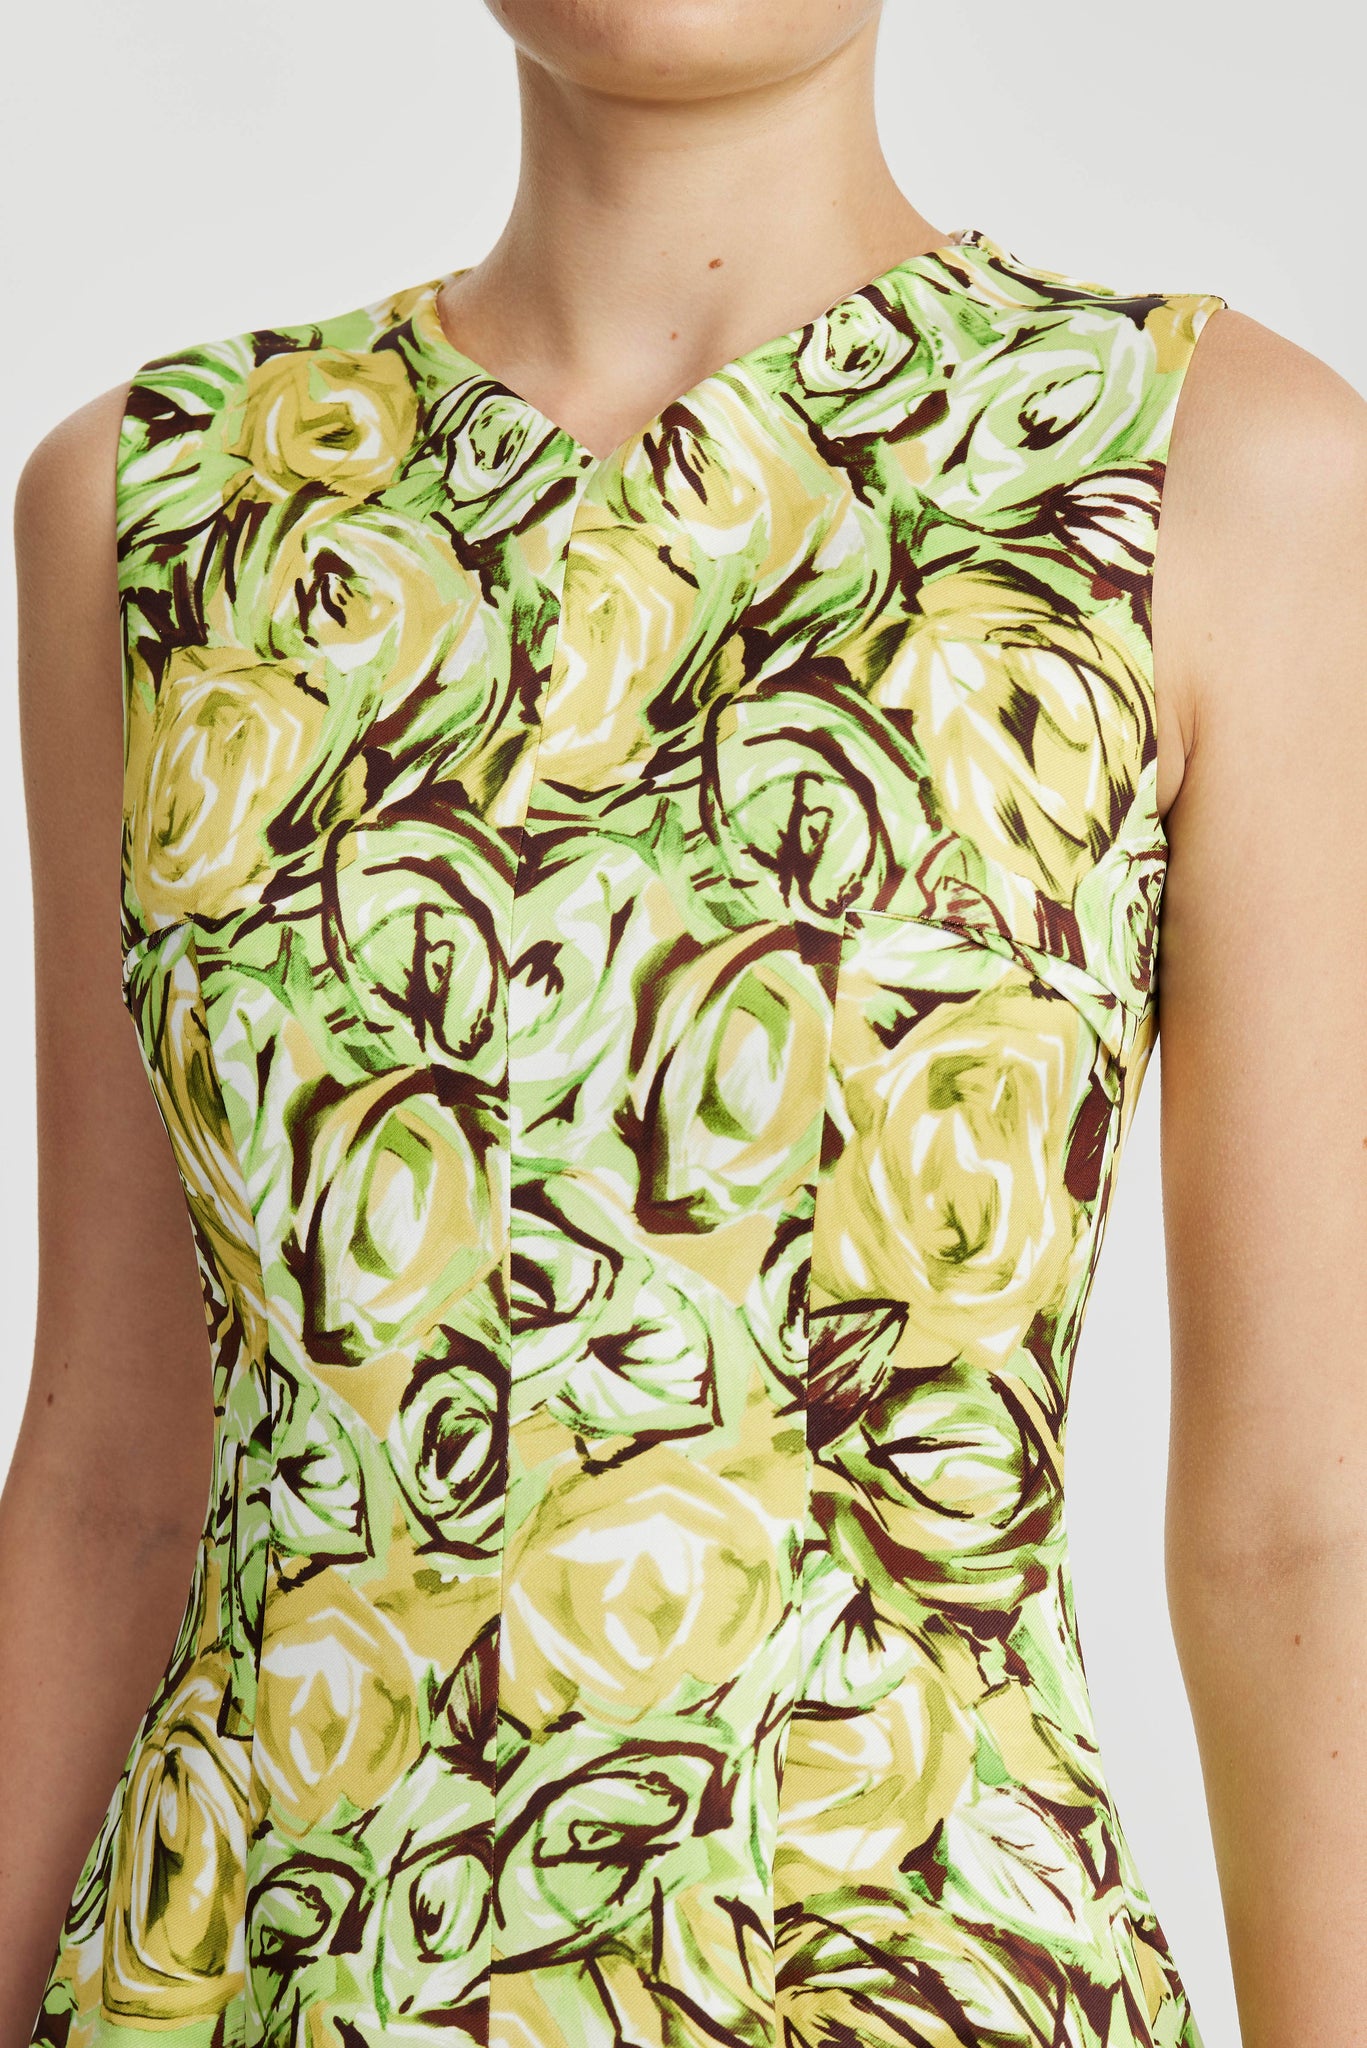 Madi Dress In Abstract Green And Lemon Rose Printed Twill | Emilia Wickstead